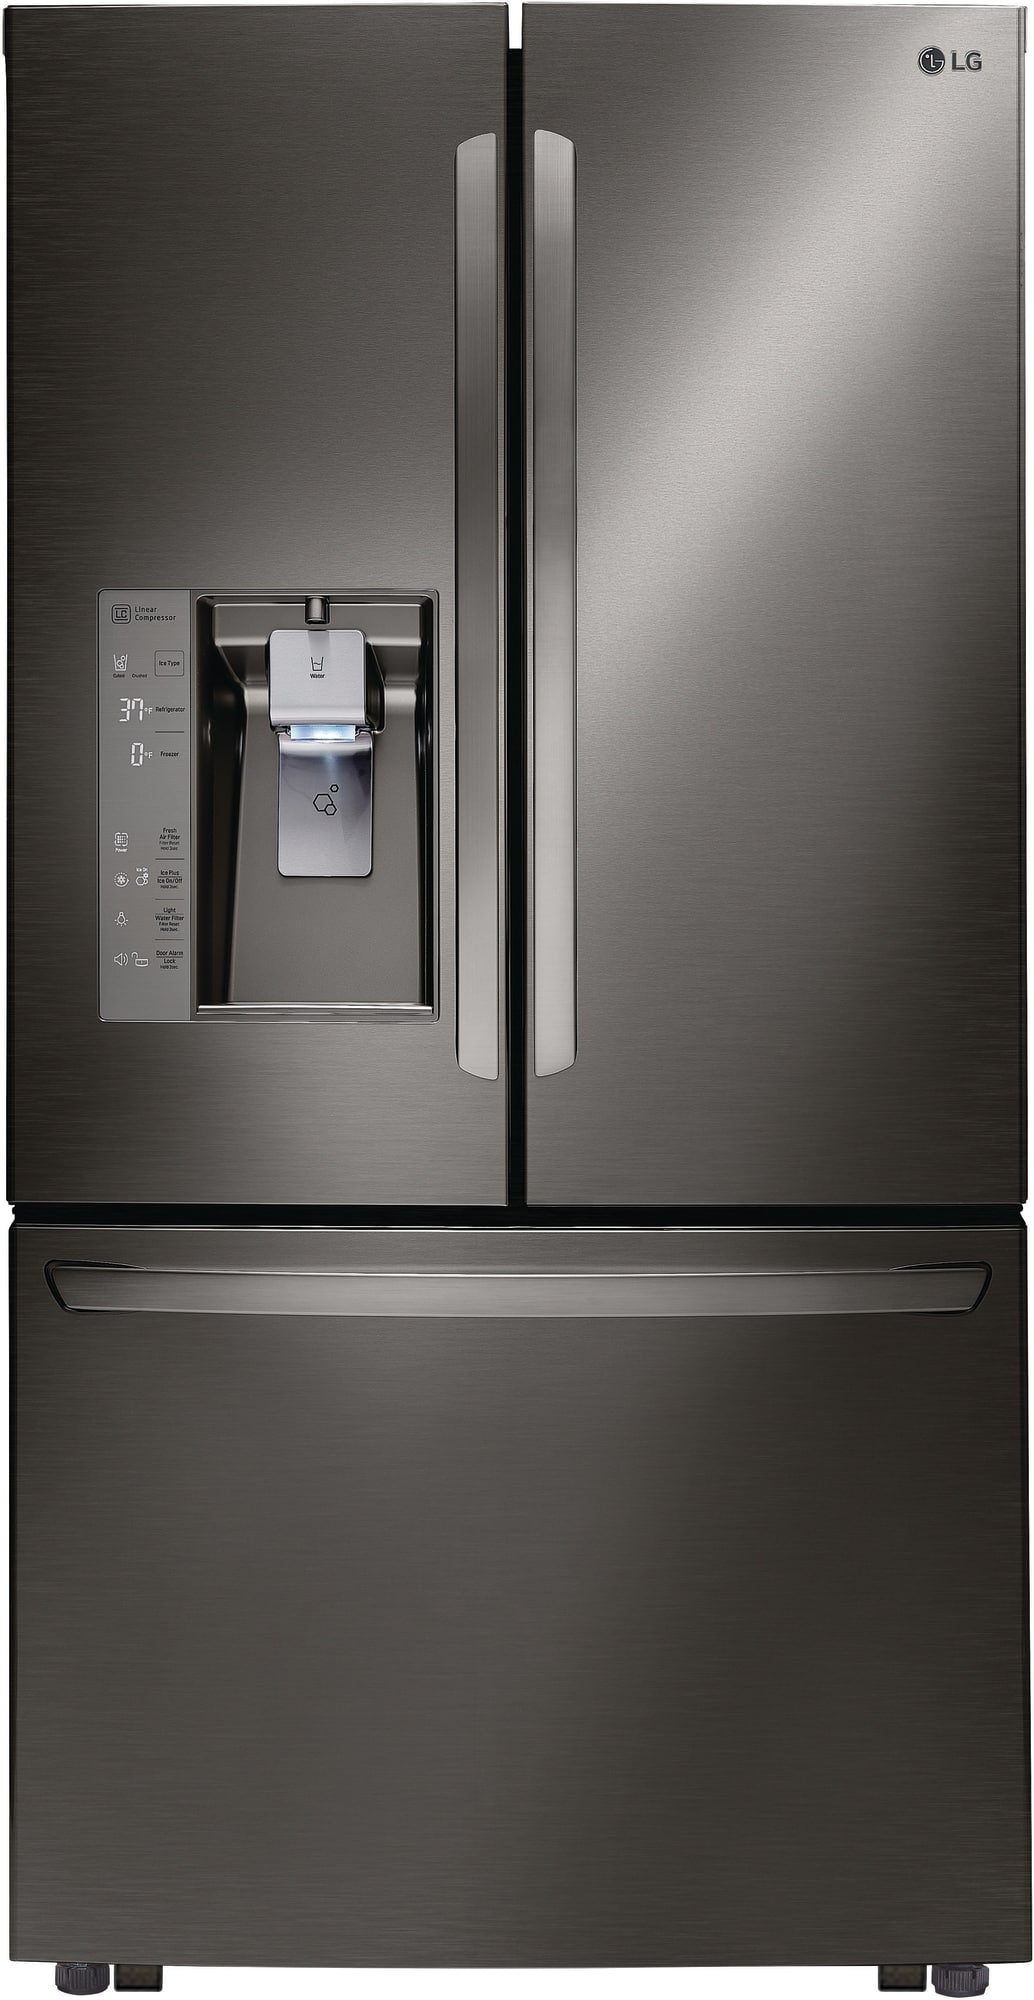 LG LFXS32736D 36 Inch French Door Refrigerator with Smart CoolingÂ® Plus, Slim SpacePlusÂ® Ice System